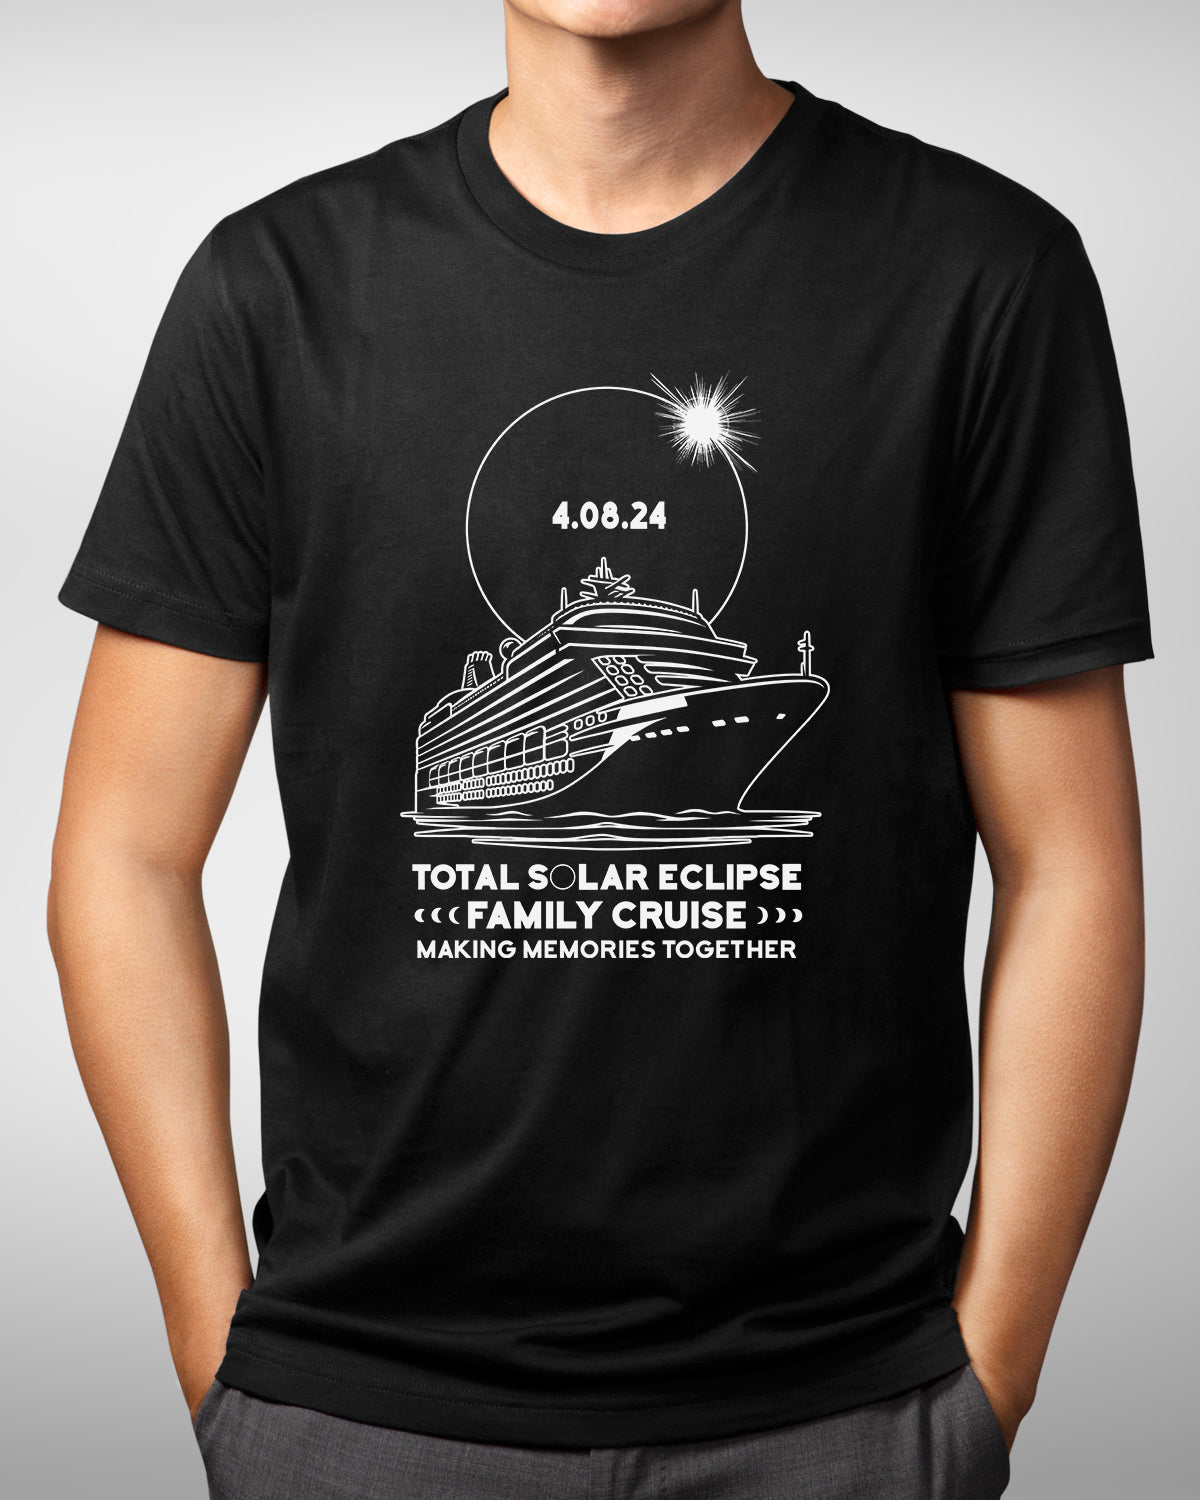 Total Solar Eclipse 2024 Shirt, Group Cruise & Family Vacation, Eclipse Souvenir & Matching Cruise Squad Crew